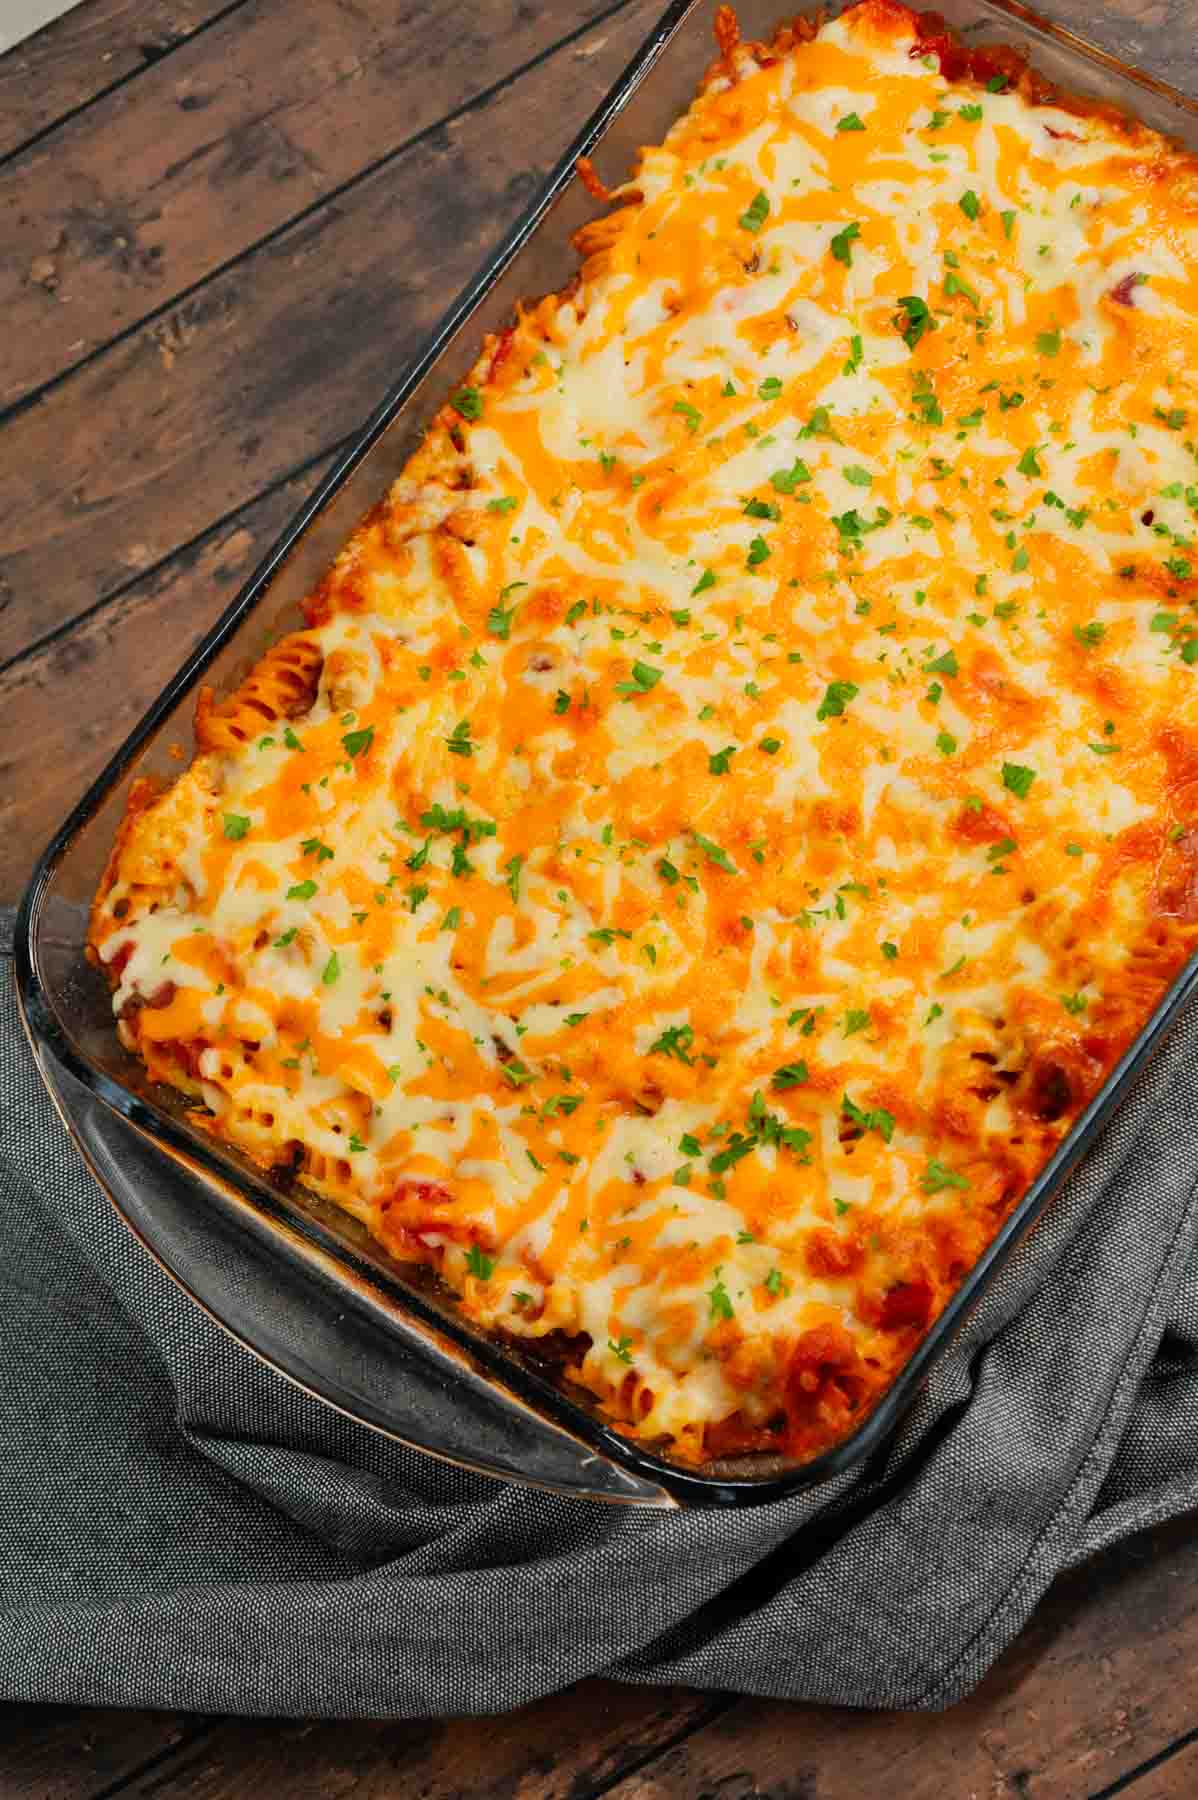 Cheeseburger Casserole is a hearty dish loaded with rotini pasta, ground beef, diced red onions, diced tomatoes, cheddar soup and shredded cheddar cheese.